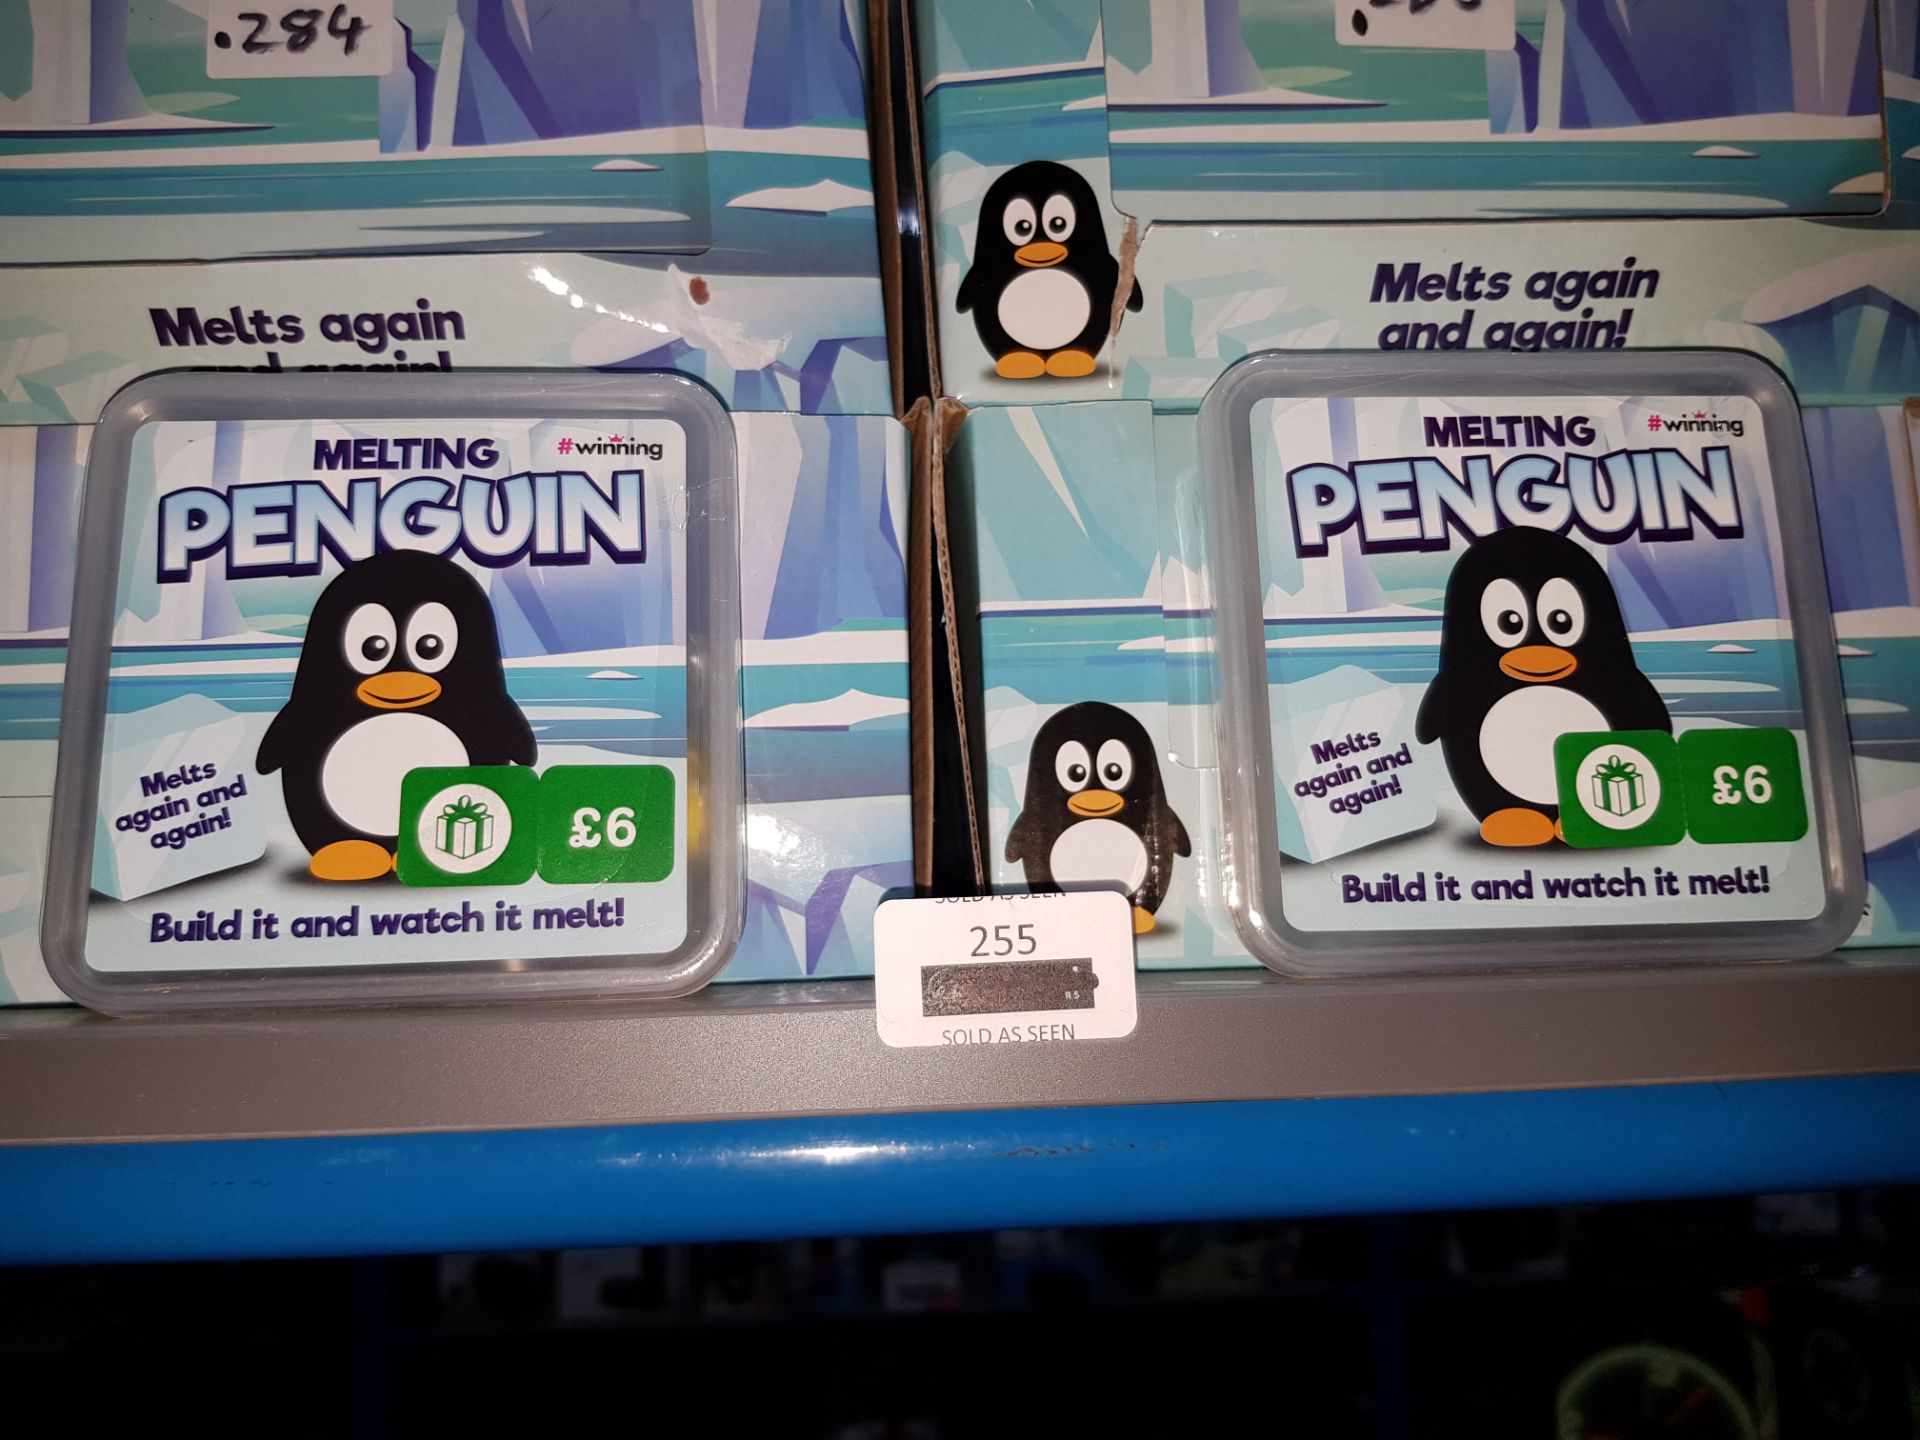 COMBINED RRP £288 - 48 X #WINNING (BOOTS) MELTING PENGUINS (RRP £6 EACH) ** AS NEW / SEALED